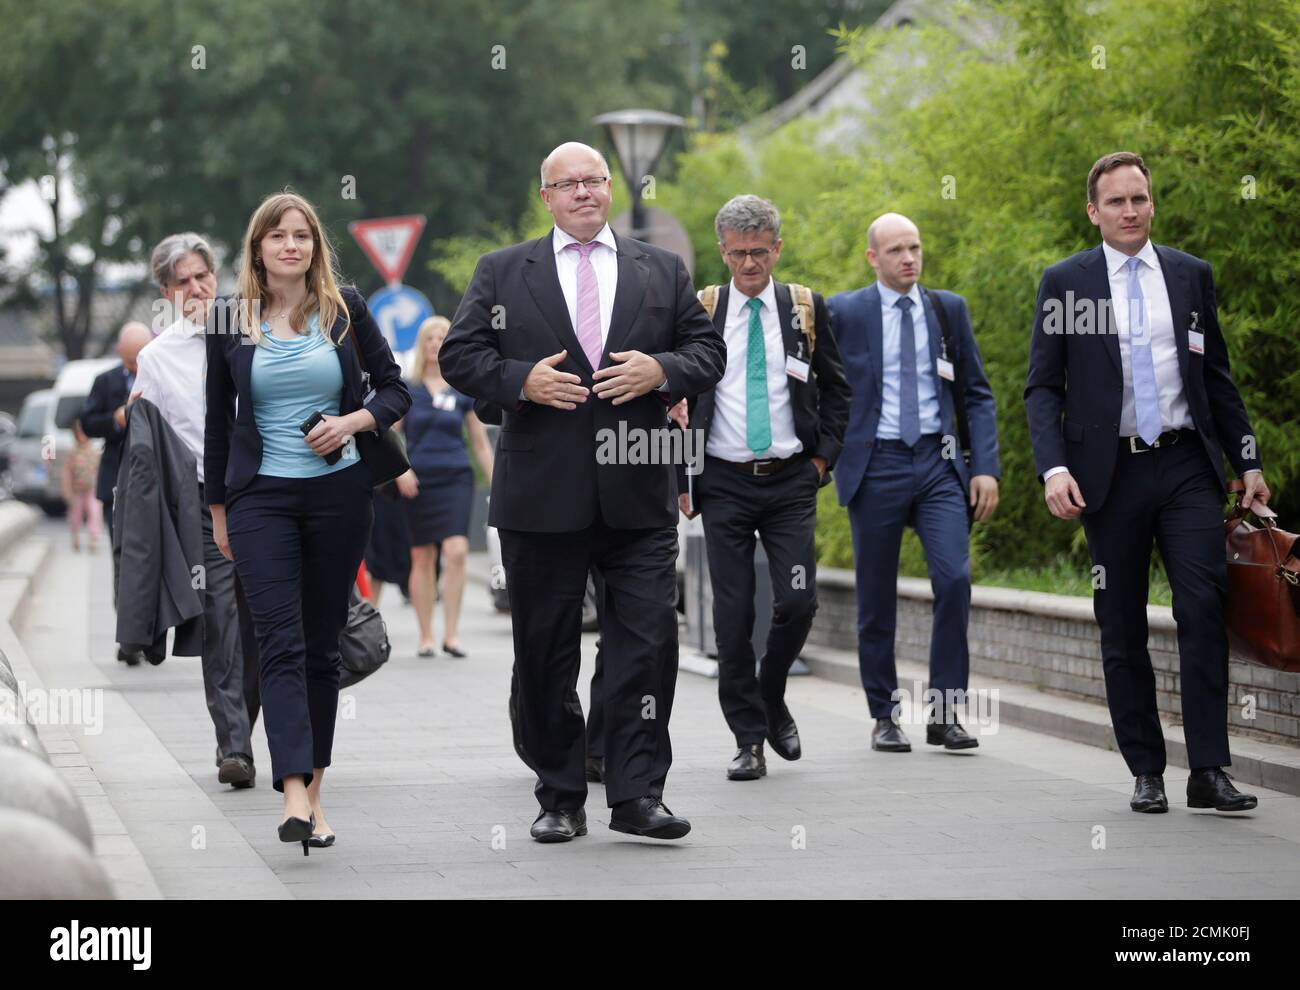 Germany's Economy Minister Peter Altmaier arrives to meet the media in front of the Drum Tower in Beijing, China June 19, 2019. REUTERS/Jason Lee Stock Photo